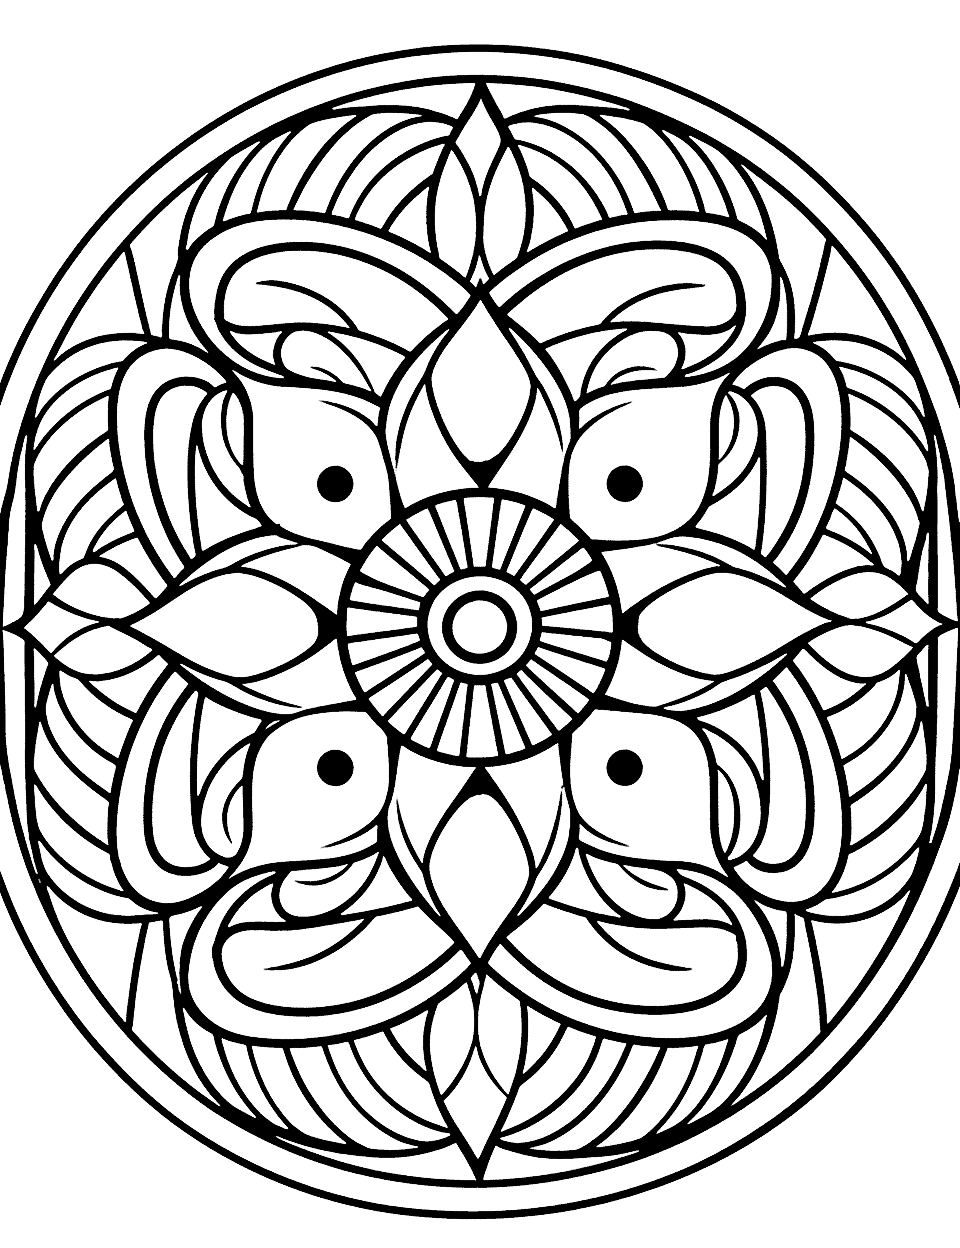 Floral Lotus Mandala Coloring Page - A mandala focusing on the beautiful and spiritual lotus flower, surrounded by calming water patterns.